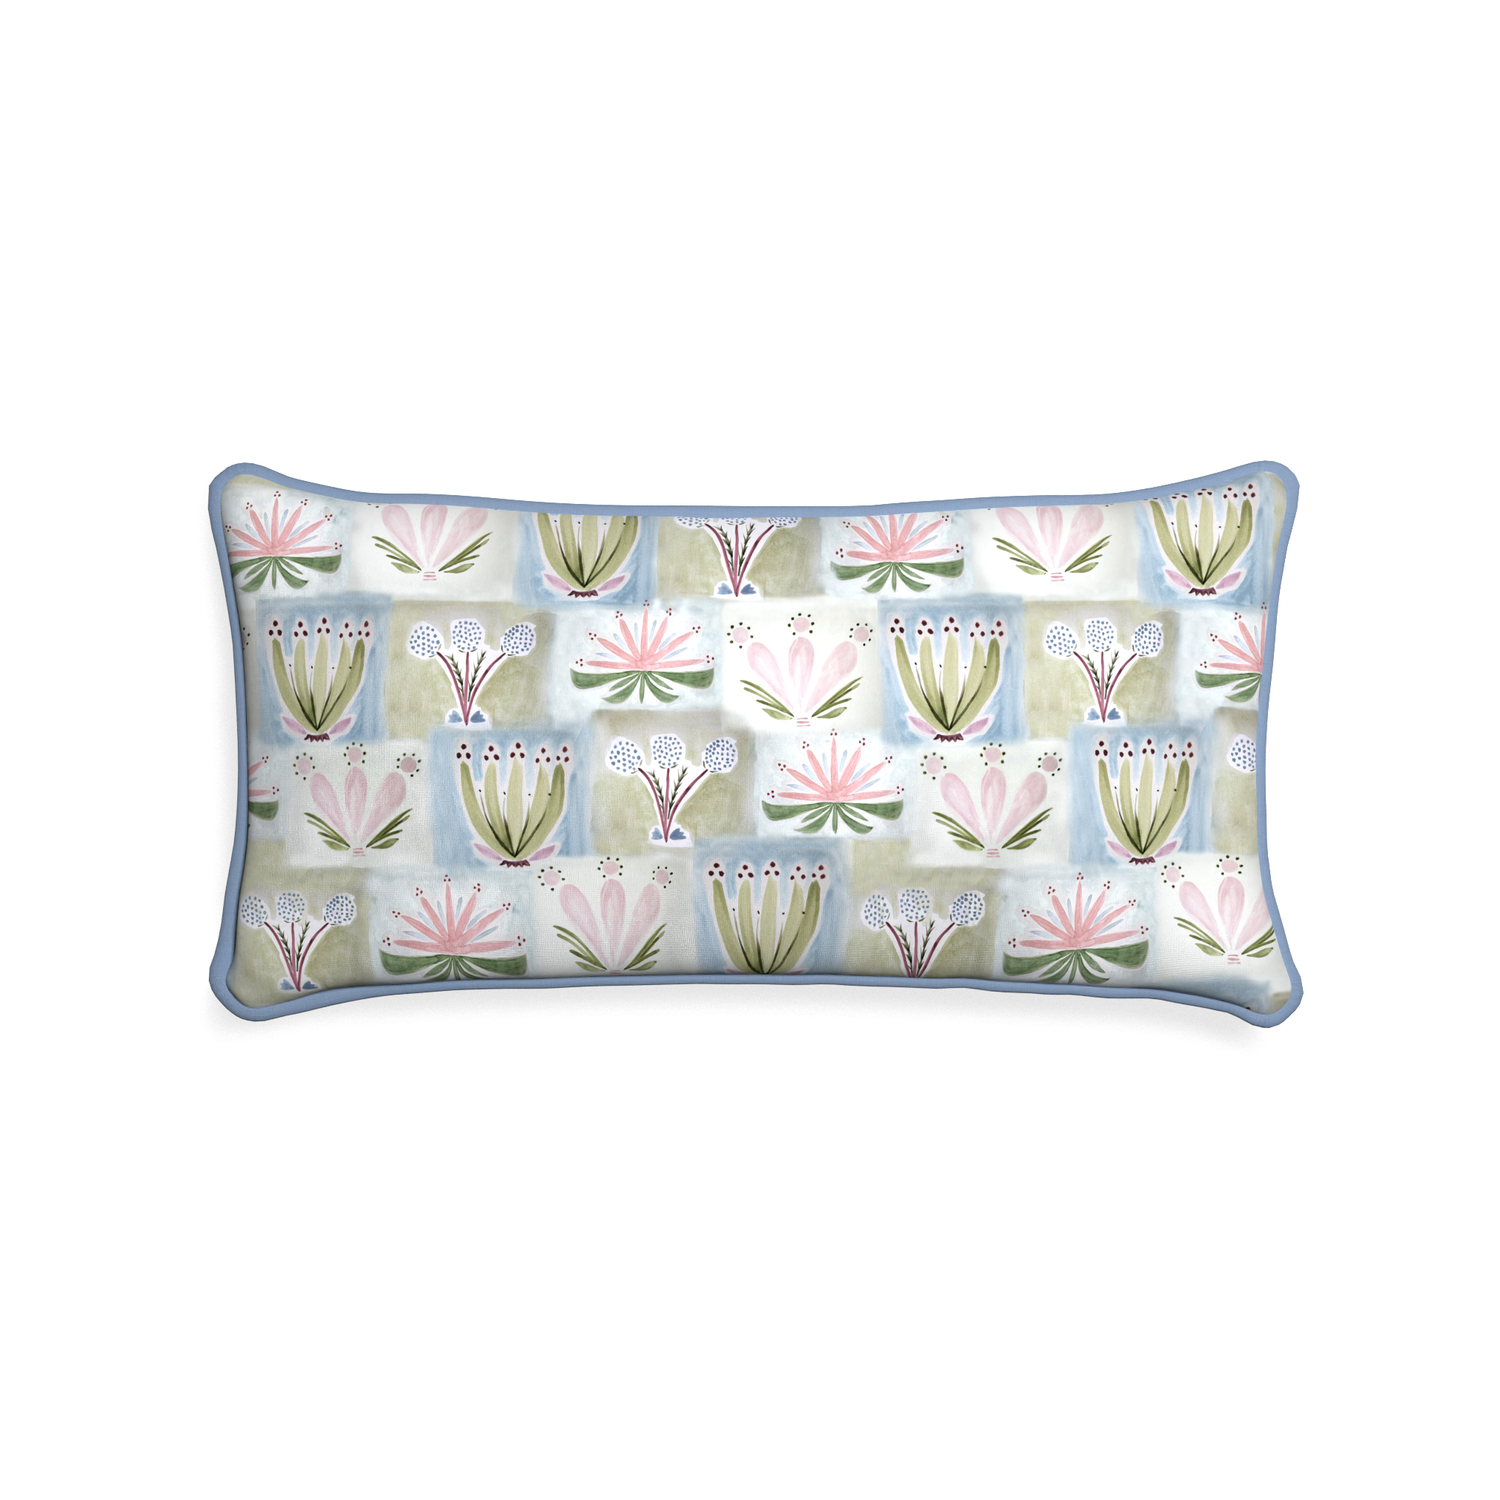 Midi-lumbar harper custom hand-painted floralpillow with sky piping on white background